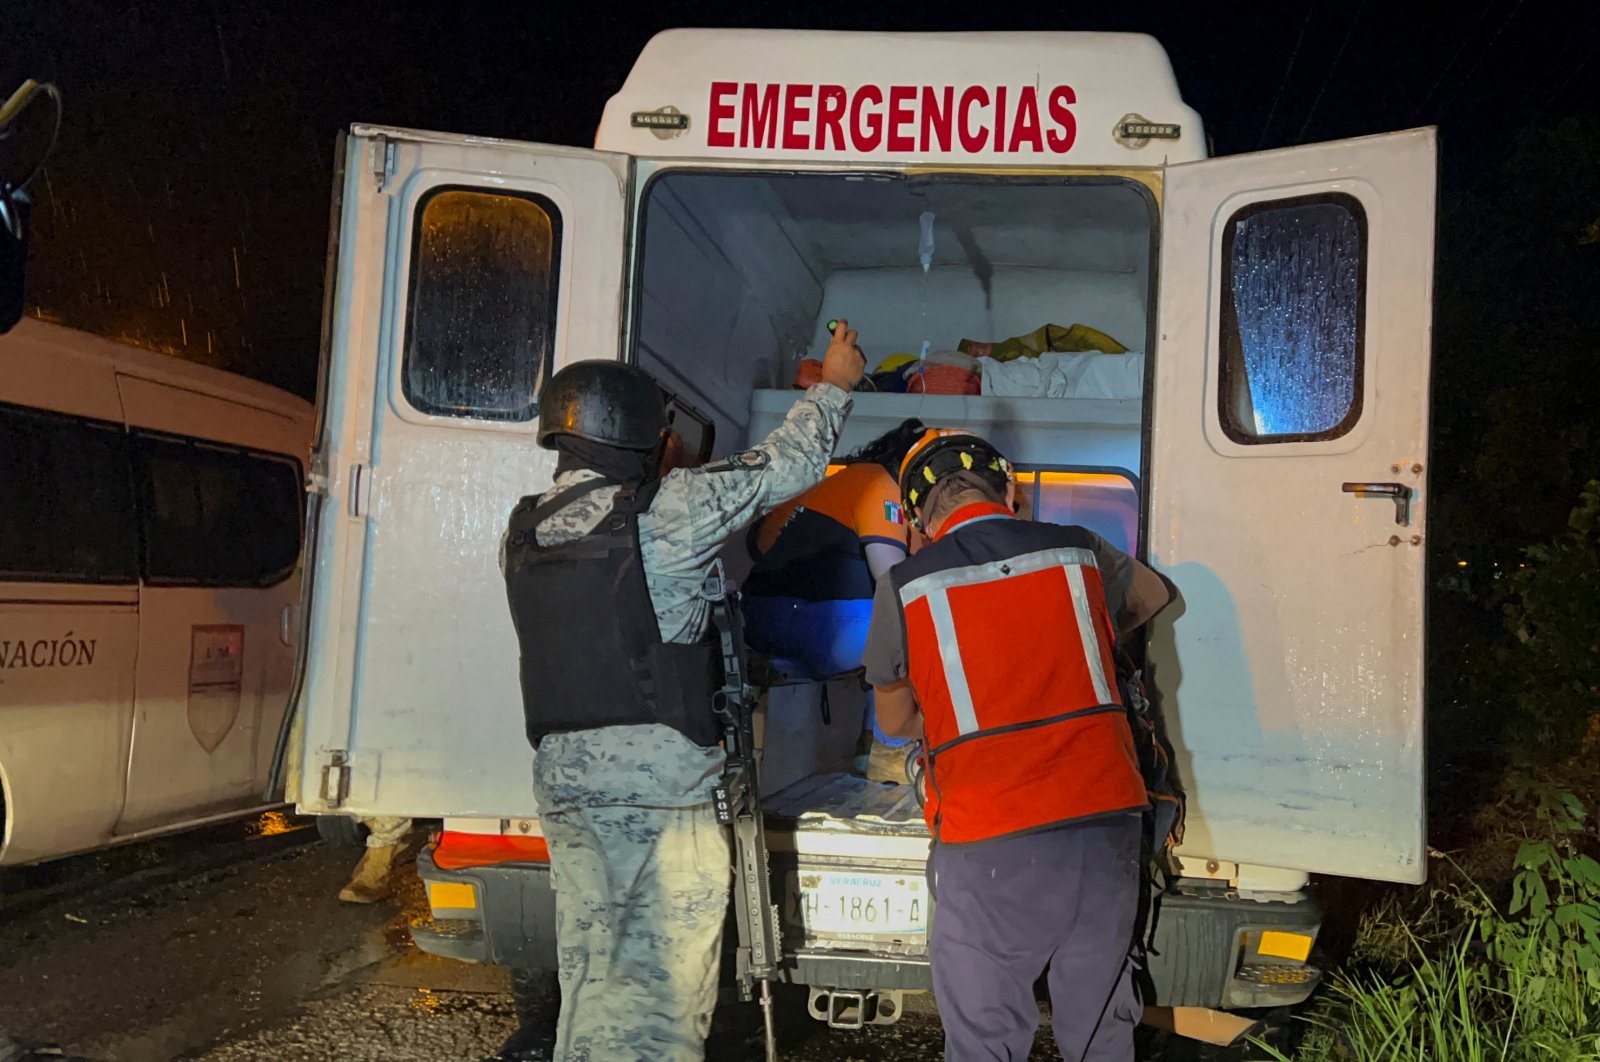 A member of the National Guard uses a torch to help a paramedic giving first aid to a migrant injured inside an ambulance, in the town of Acayucan, in Veracruz state, Mexico, July 27, 2022. (Reuters Photo)